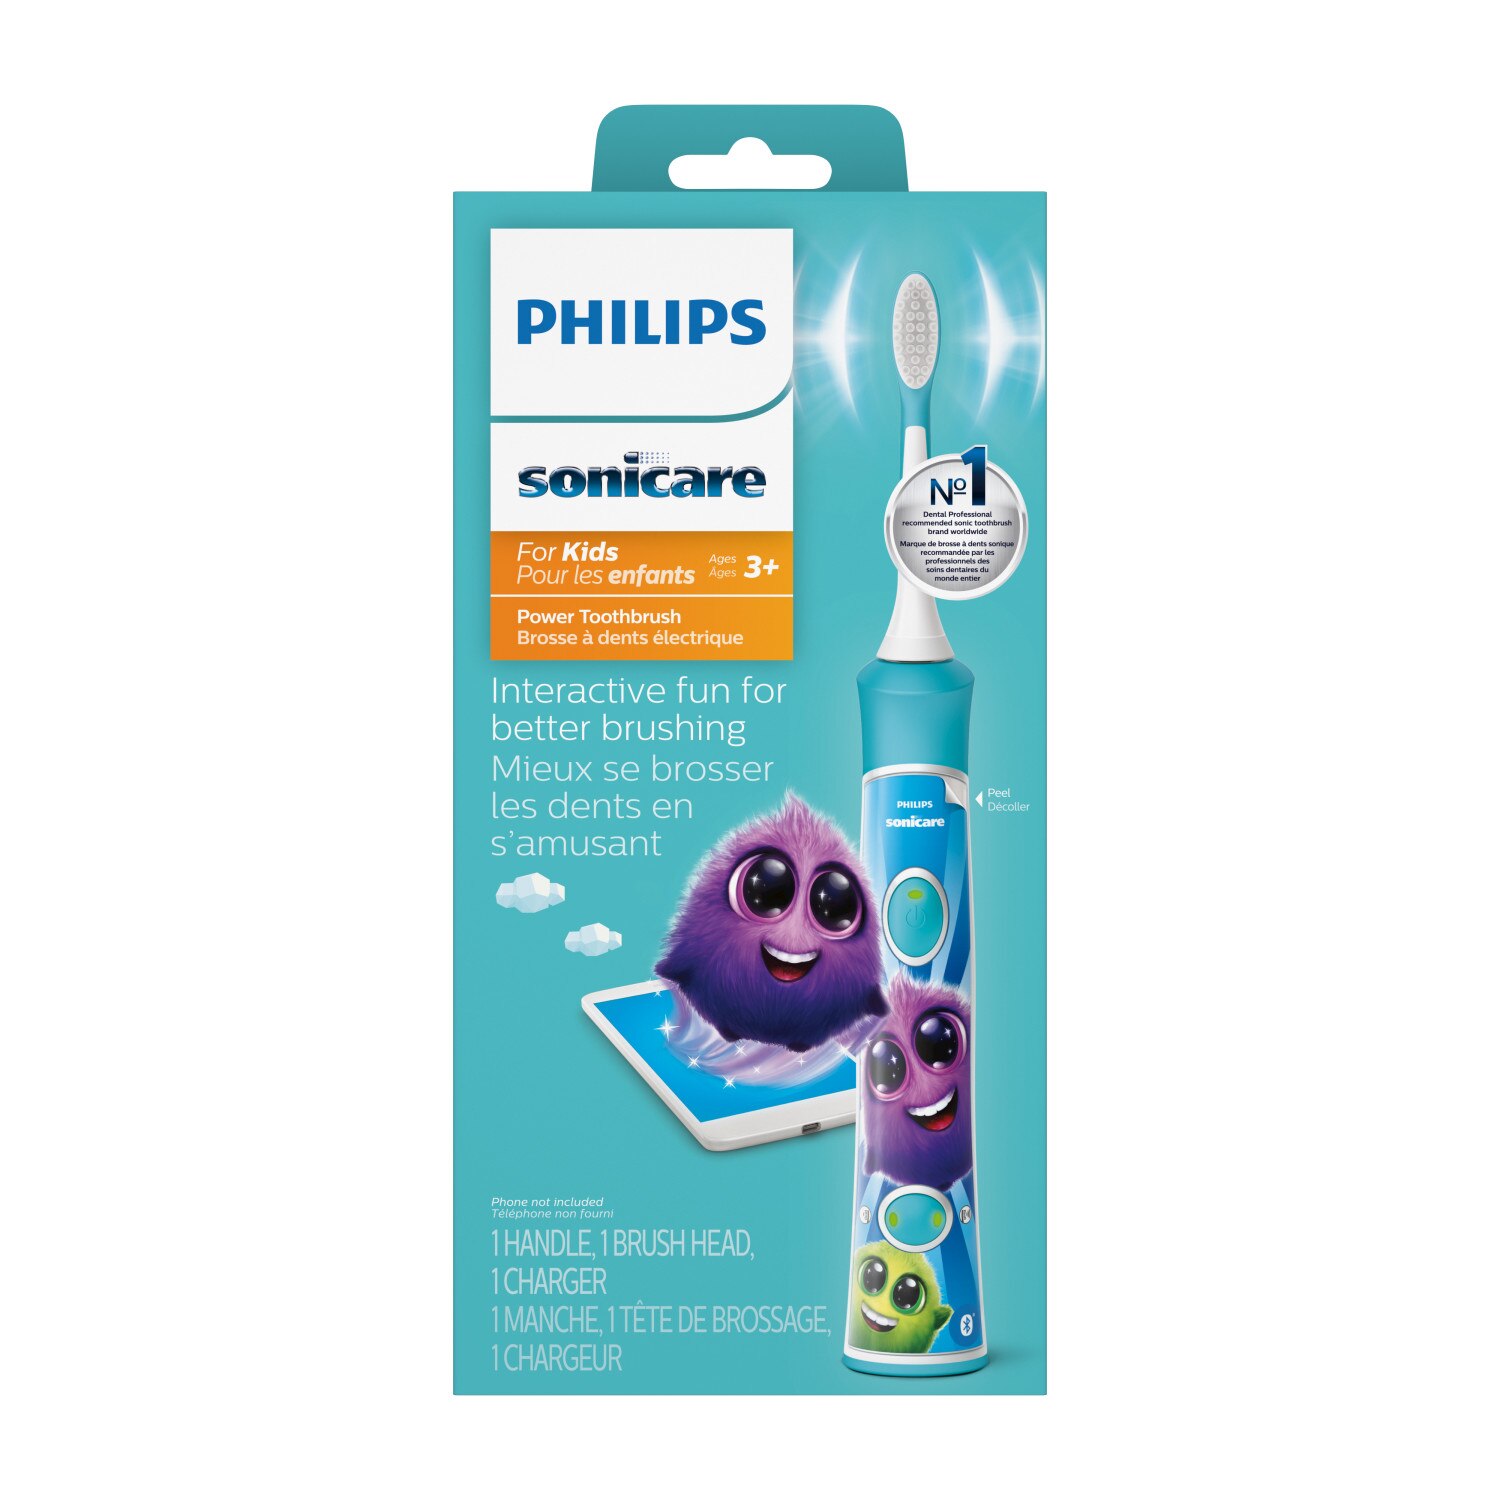 Philips Sonicare Electric Toothbrush for Kids, Advanced Sonic Technology, Aqua